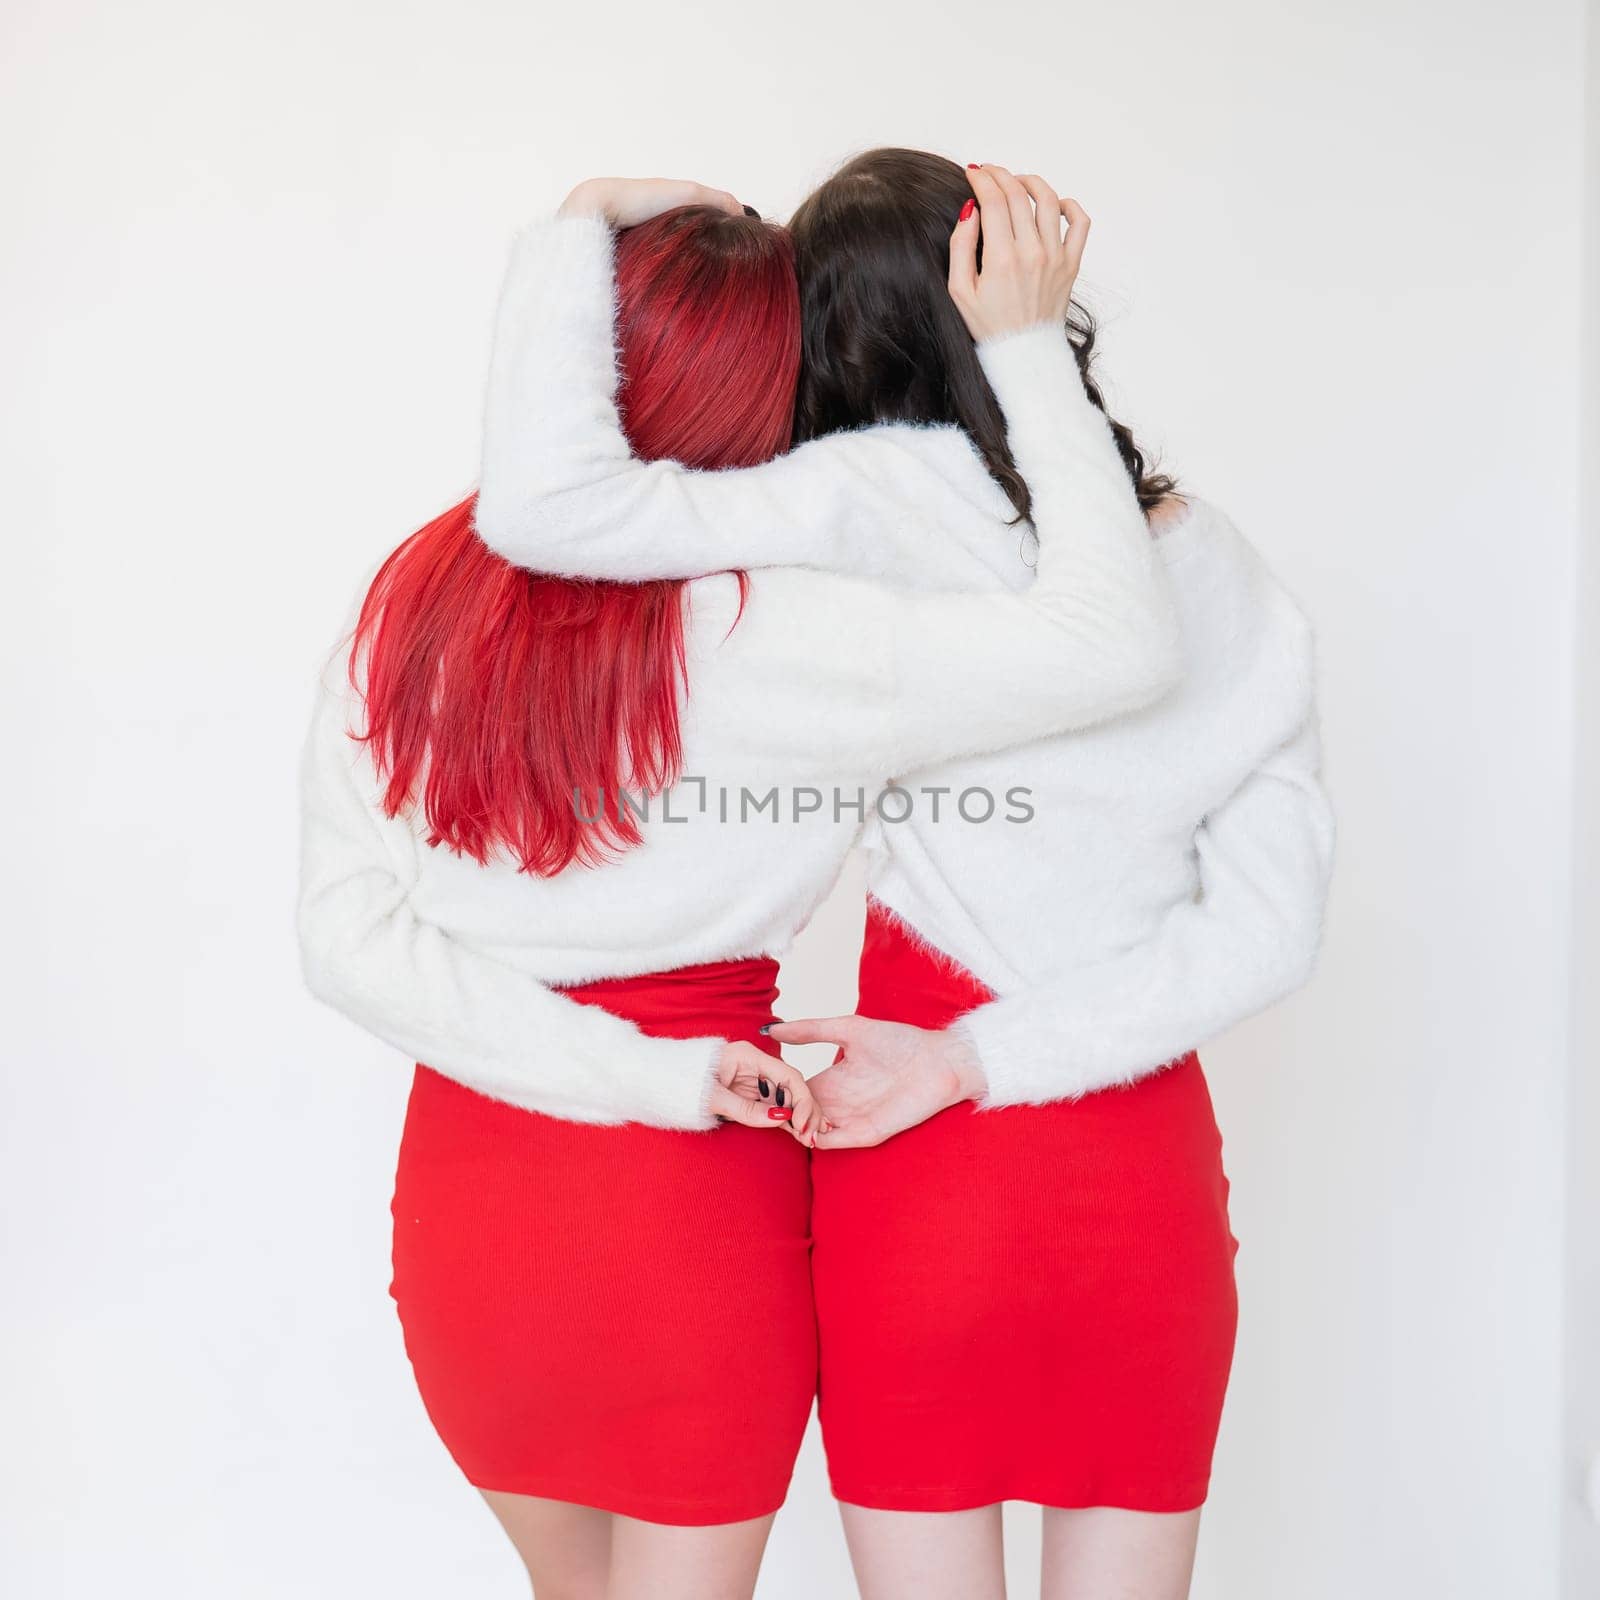 Rear view of two women dressed in identical red dresses and white sweaters. Lesbian intimacy. White background. by mrwed54